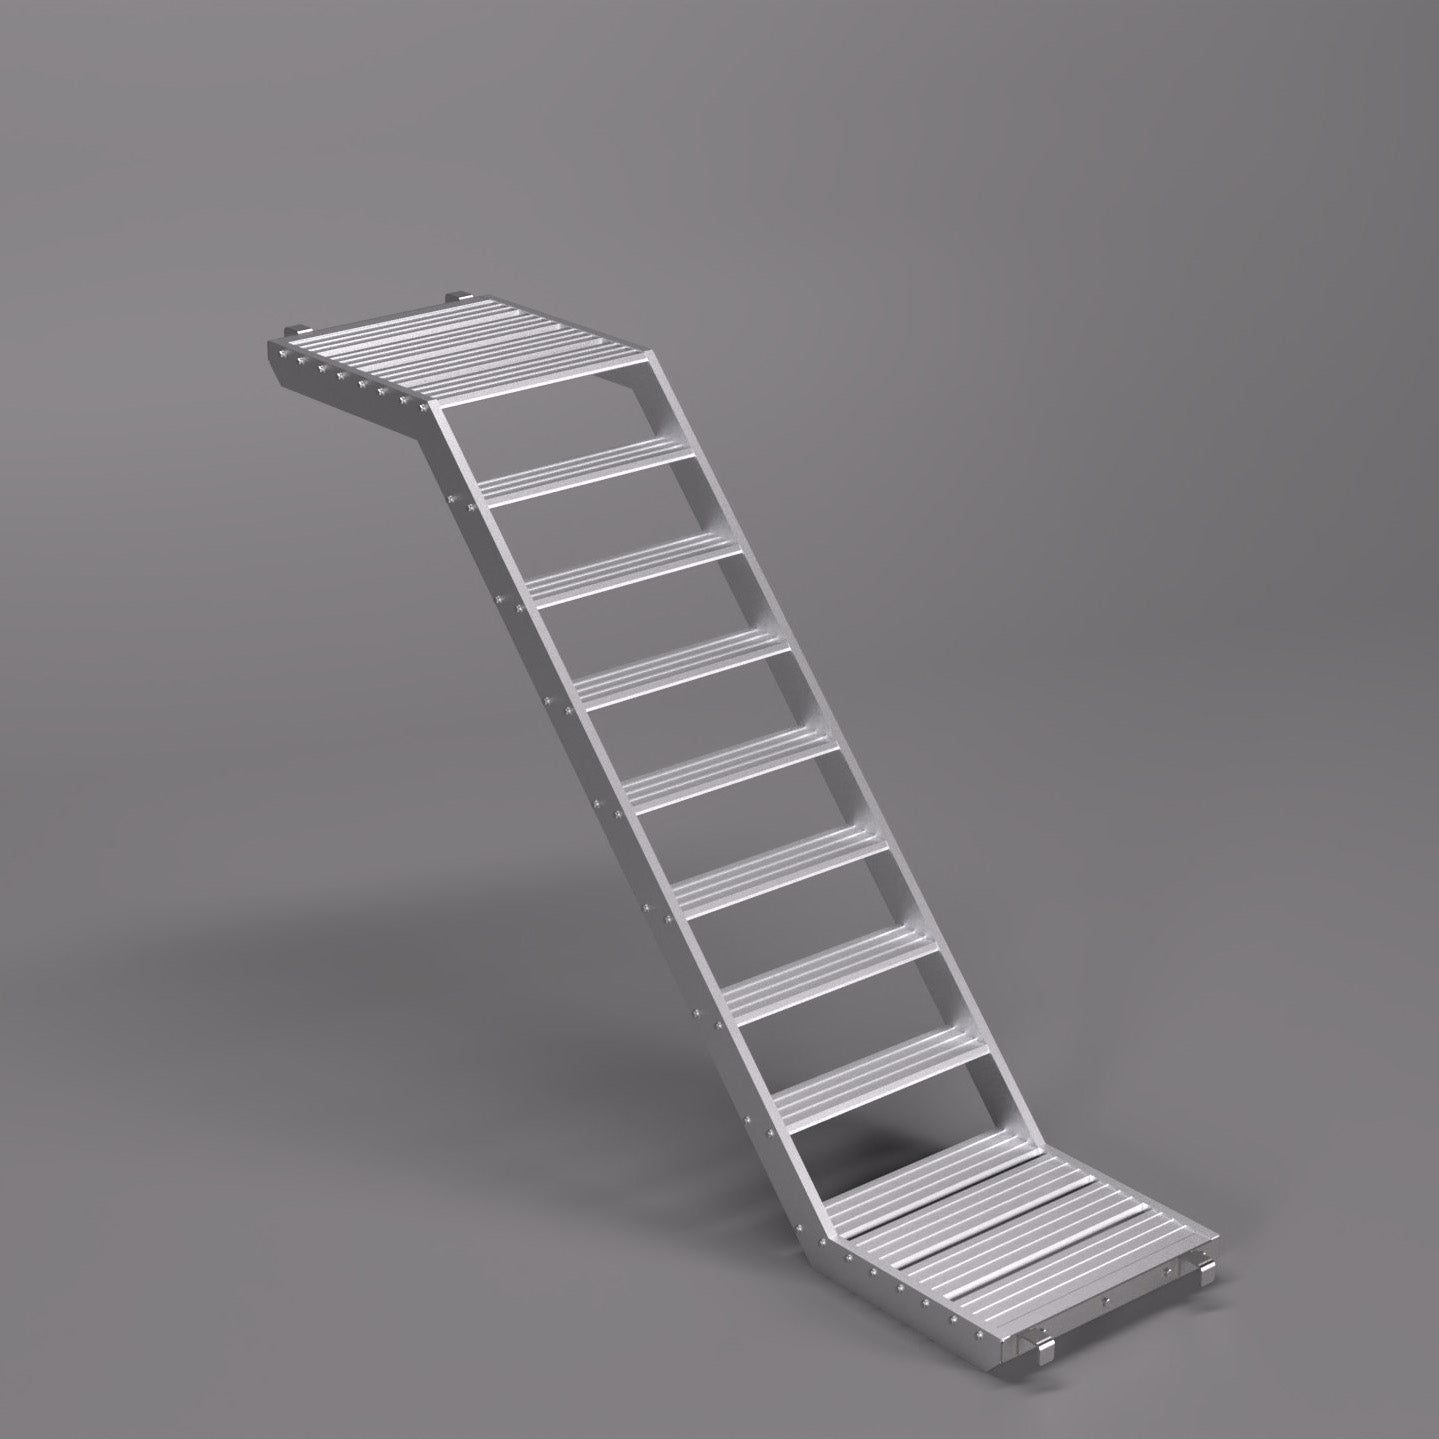 An image of the 2.57 x 1.5m ALTO Allround stair unit.